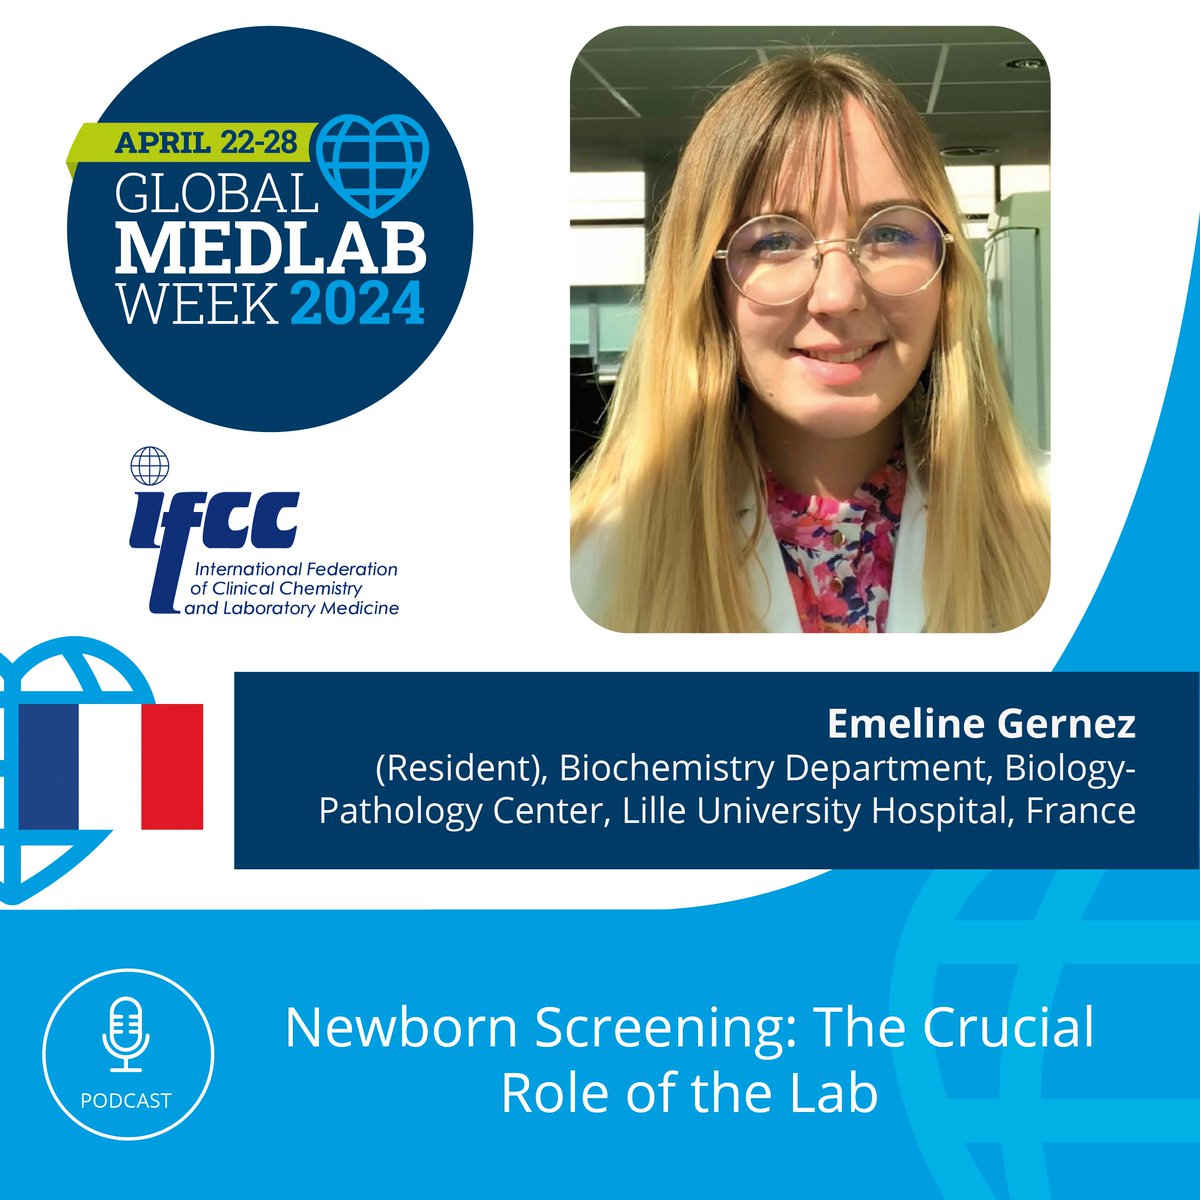 PODCAST: Newborn Screening: The Crucial Role of the Lab podcasters.spotify.com/pod/show/ifcc/… Emeline Gernez (Resident) Biochemistry Department, Biology-Pathology Center, Lille University Hospital, France.